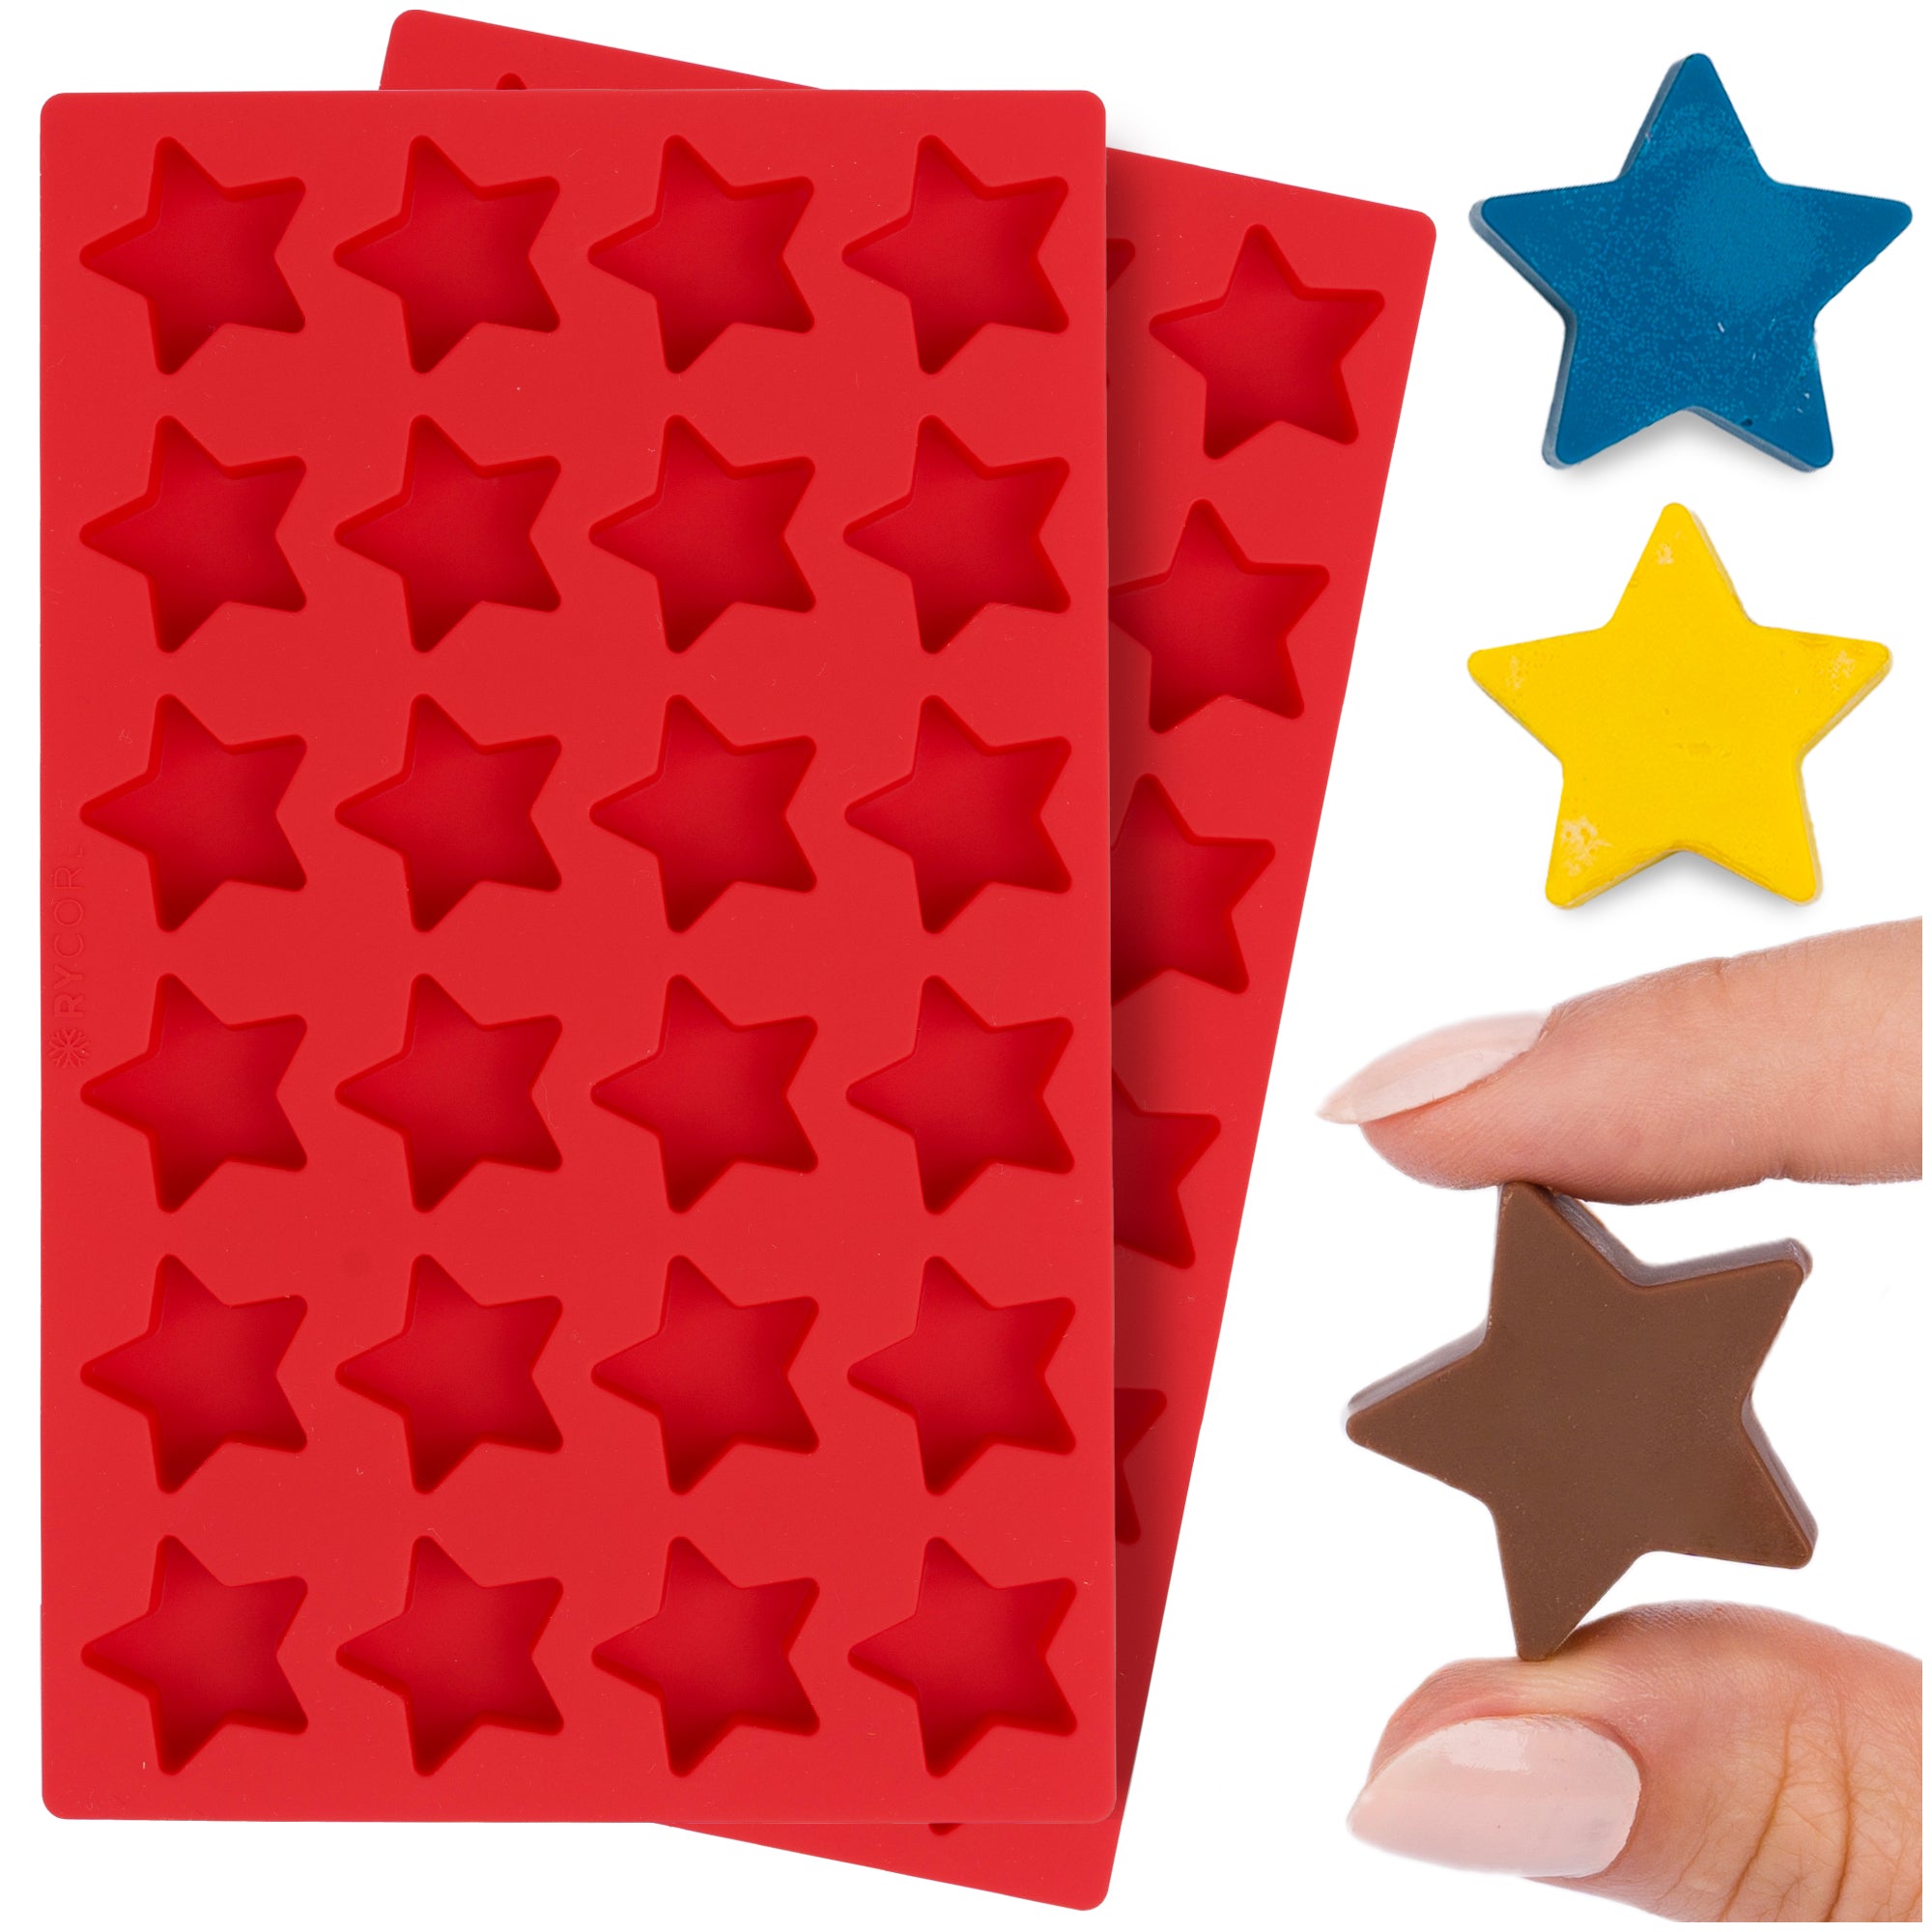 2 Pack - Mini Star Silicone Mold for Chocolates, Candies & Desserts - Silicone Star Molds Baking & Treats - Durable Star Mold for Ice Cubes & Festive Baking - Perfect for Star Shaped Chocolates & Cupcakes